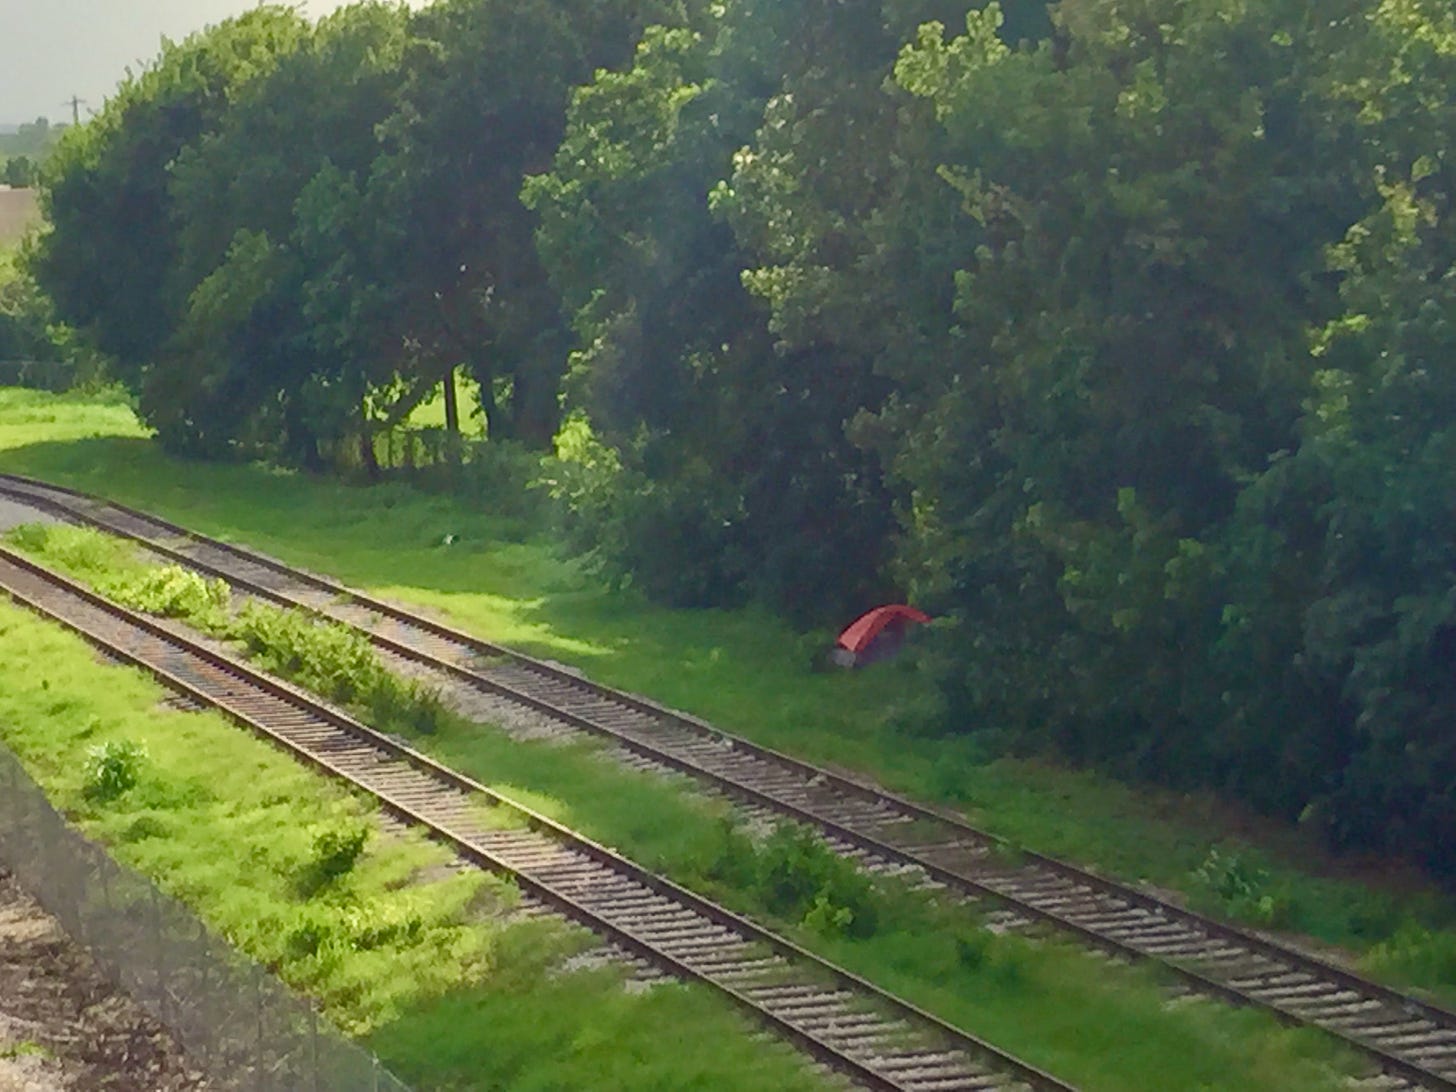 Trees along train tracks with a small red tent